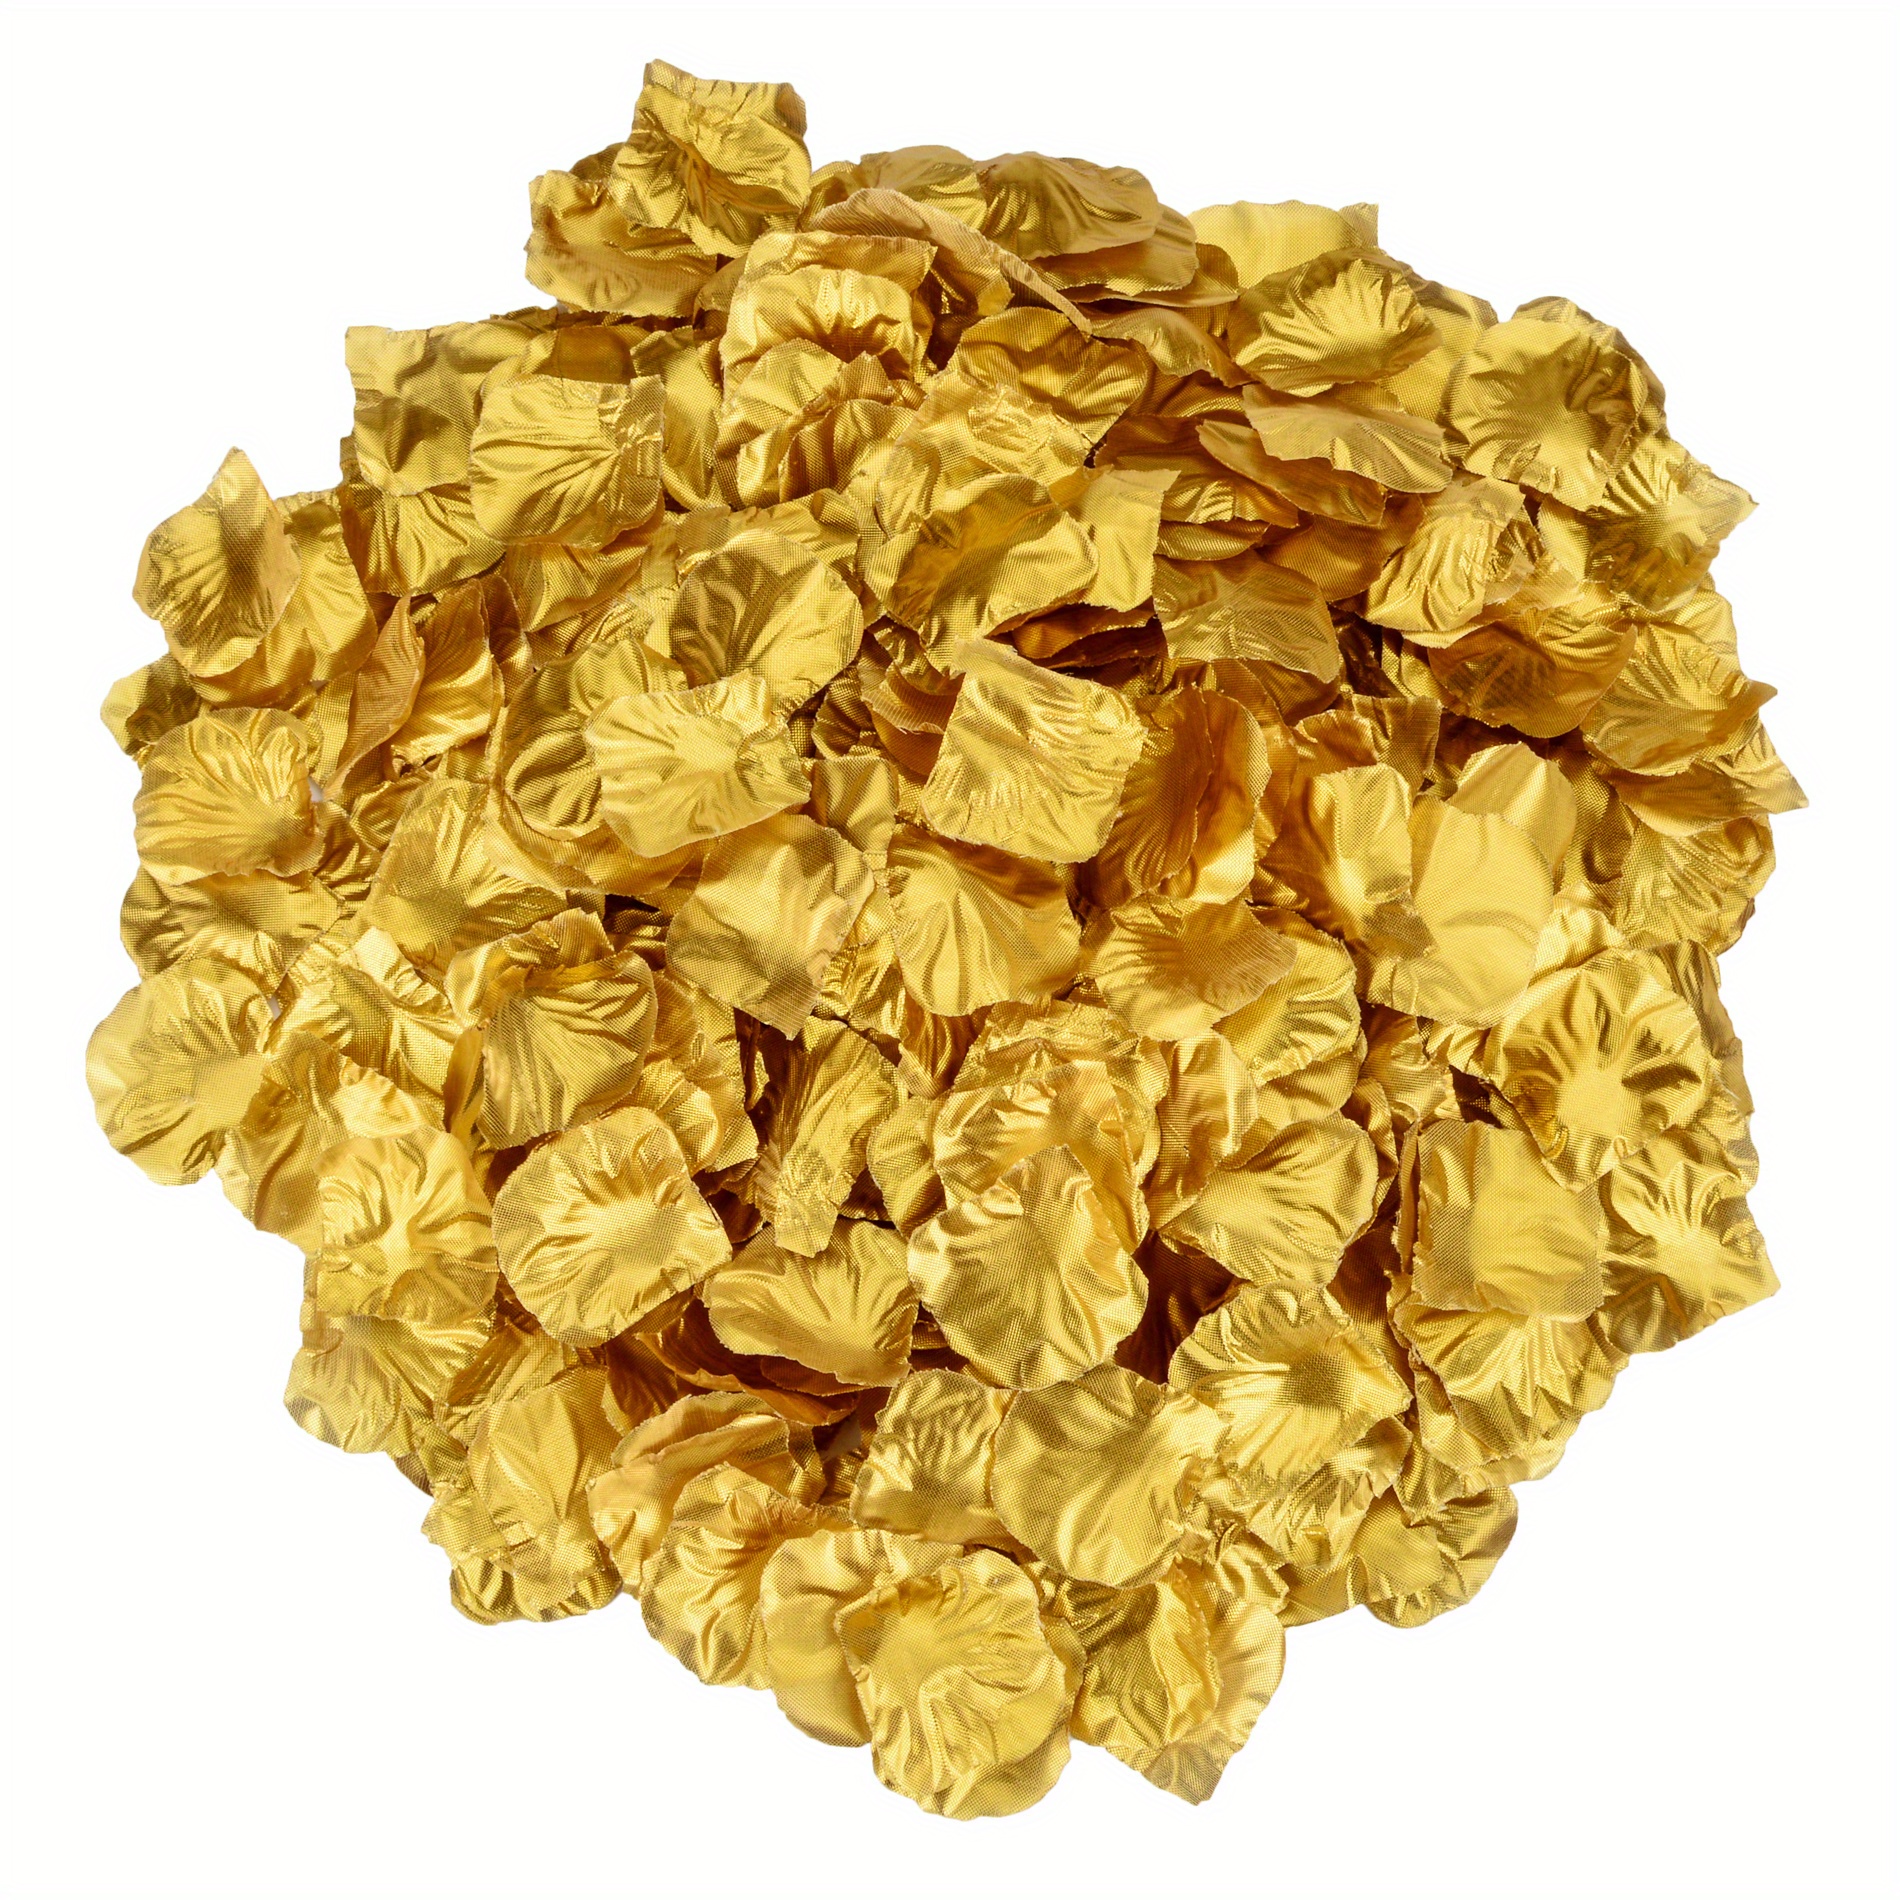 2000 Pcs Gold Silk Rose Petals, Artificial Flower Petals for  Wedding,Romantic Night,Romantic Valentines Day Decor for  Bedroom,Weddings,Party, Table